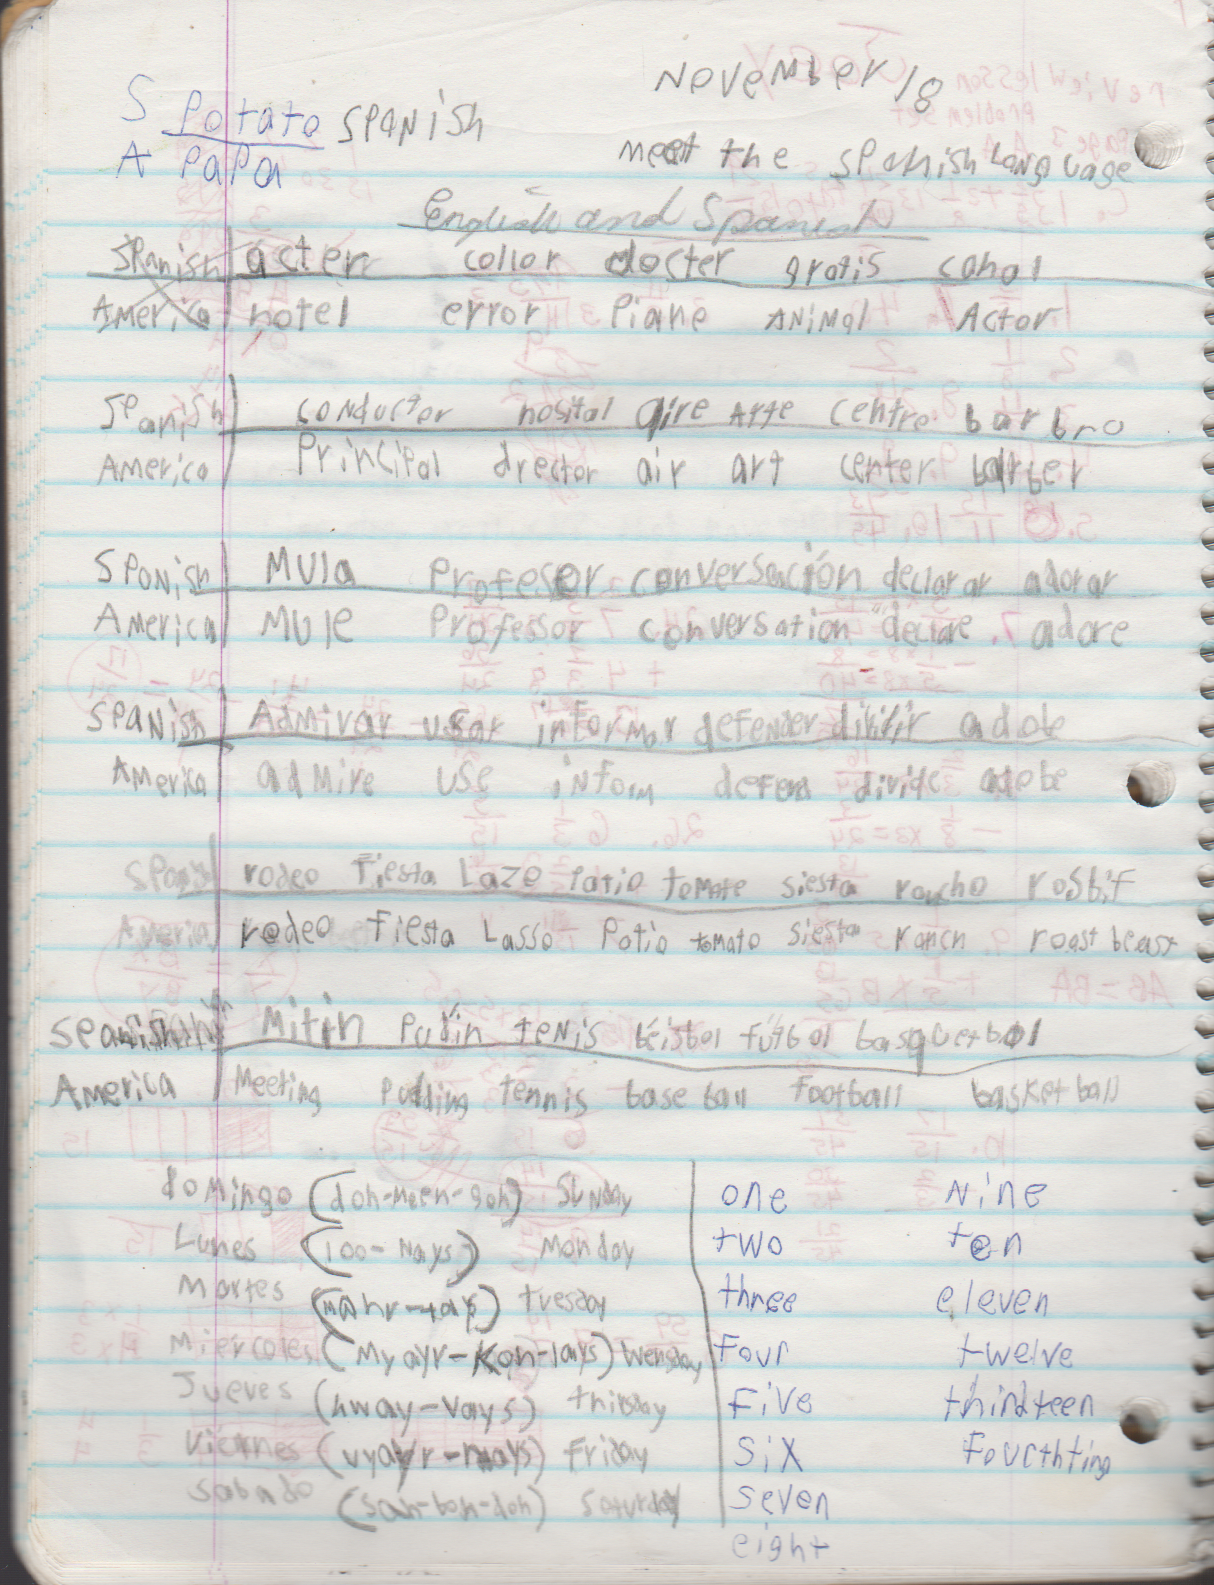 1996-08-18 - Saturday - 11 yr old Joey Arnold's School Book, dates through to 1998 apx, mostly 96, Writings, Drawings, Etc-042.png